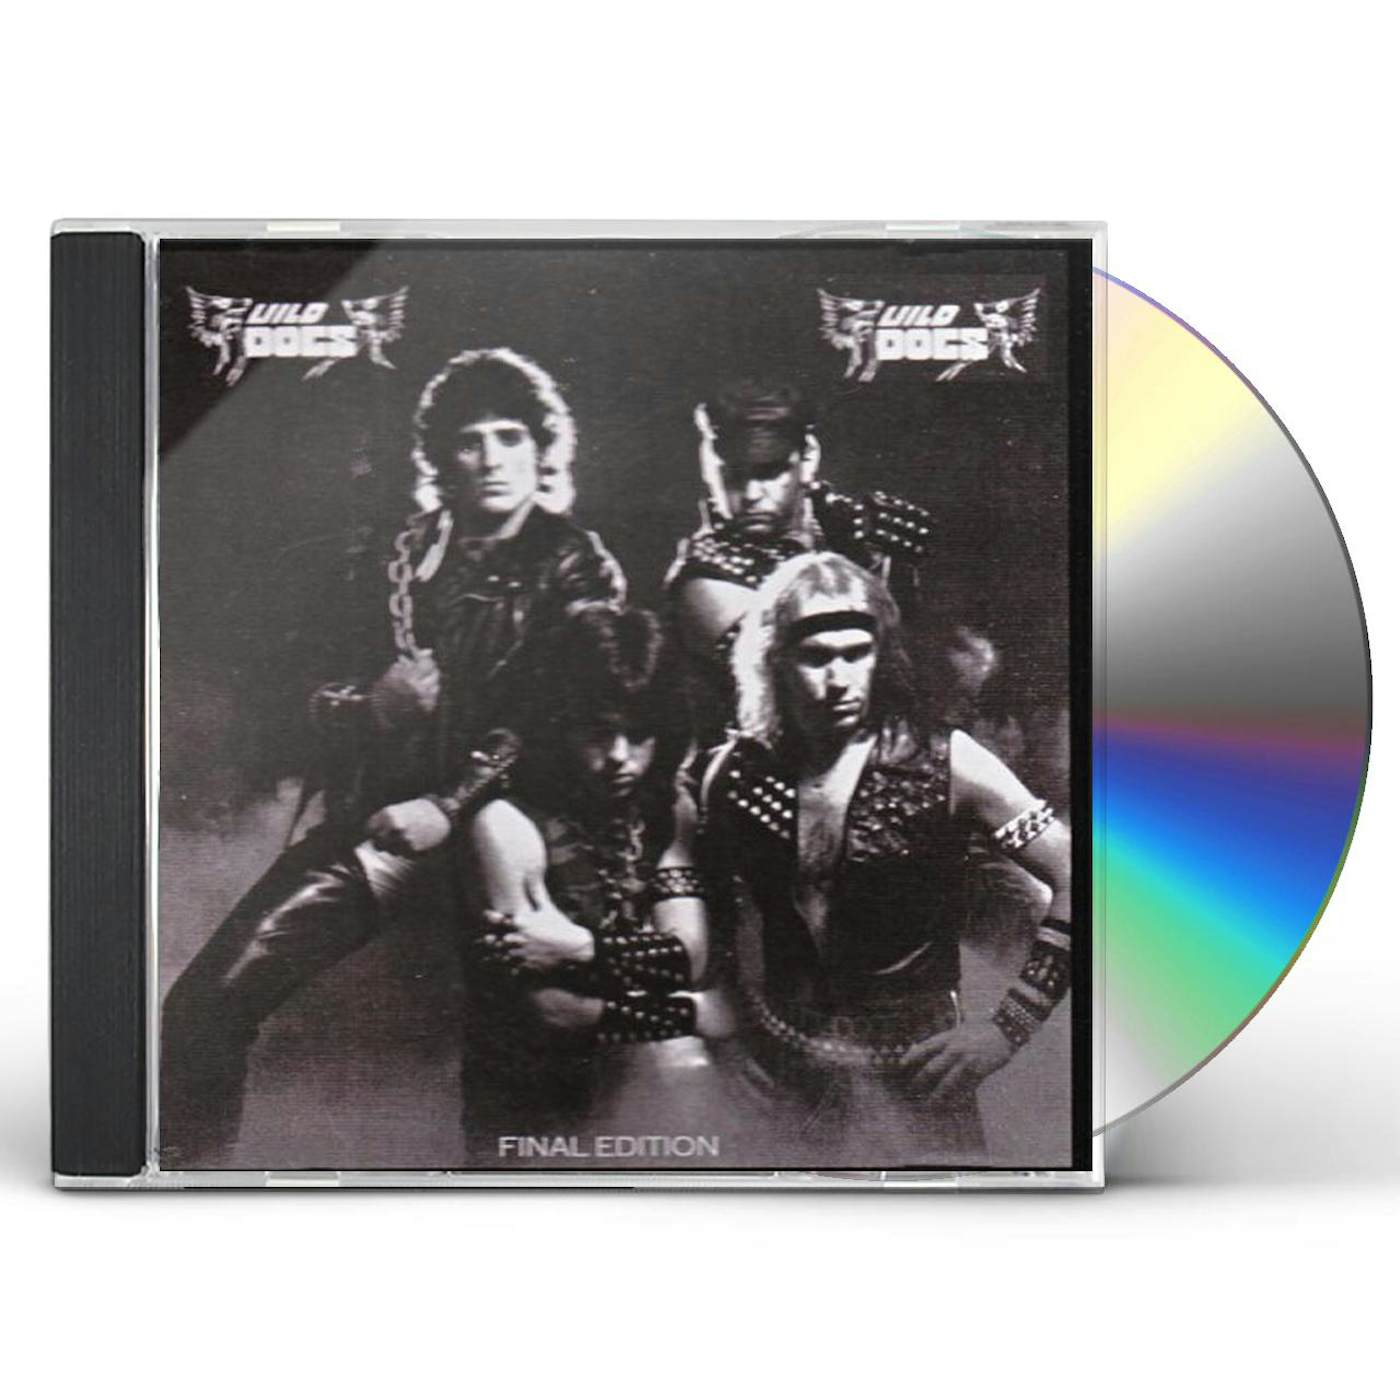 WILD DOGS FINAL EDITION CD